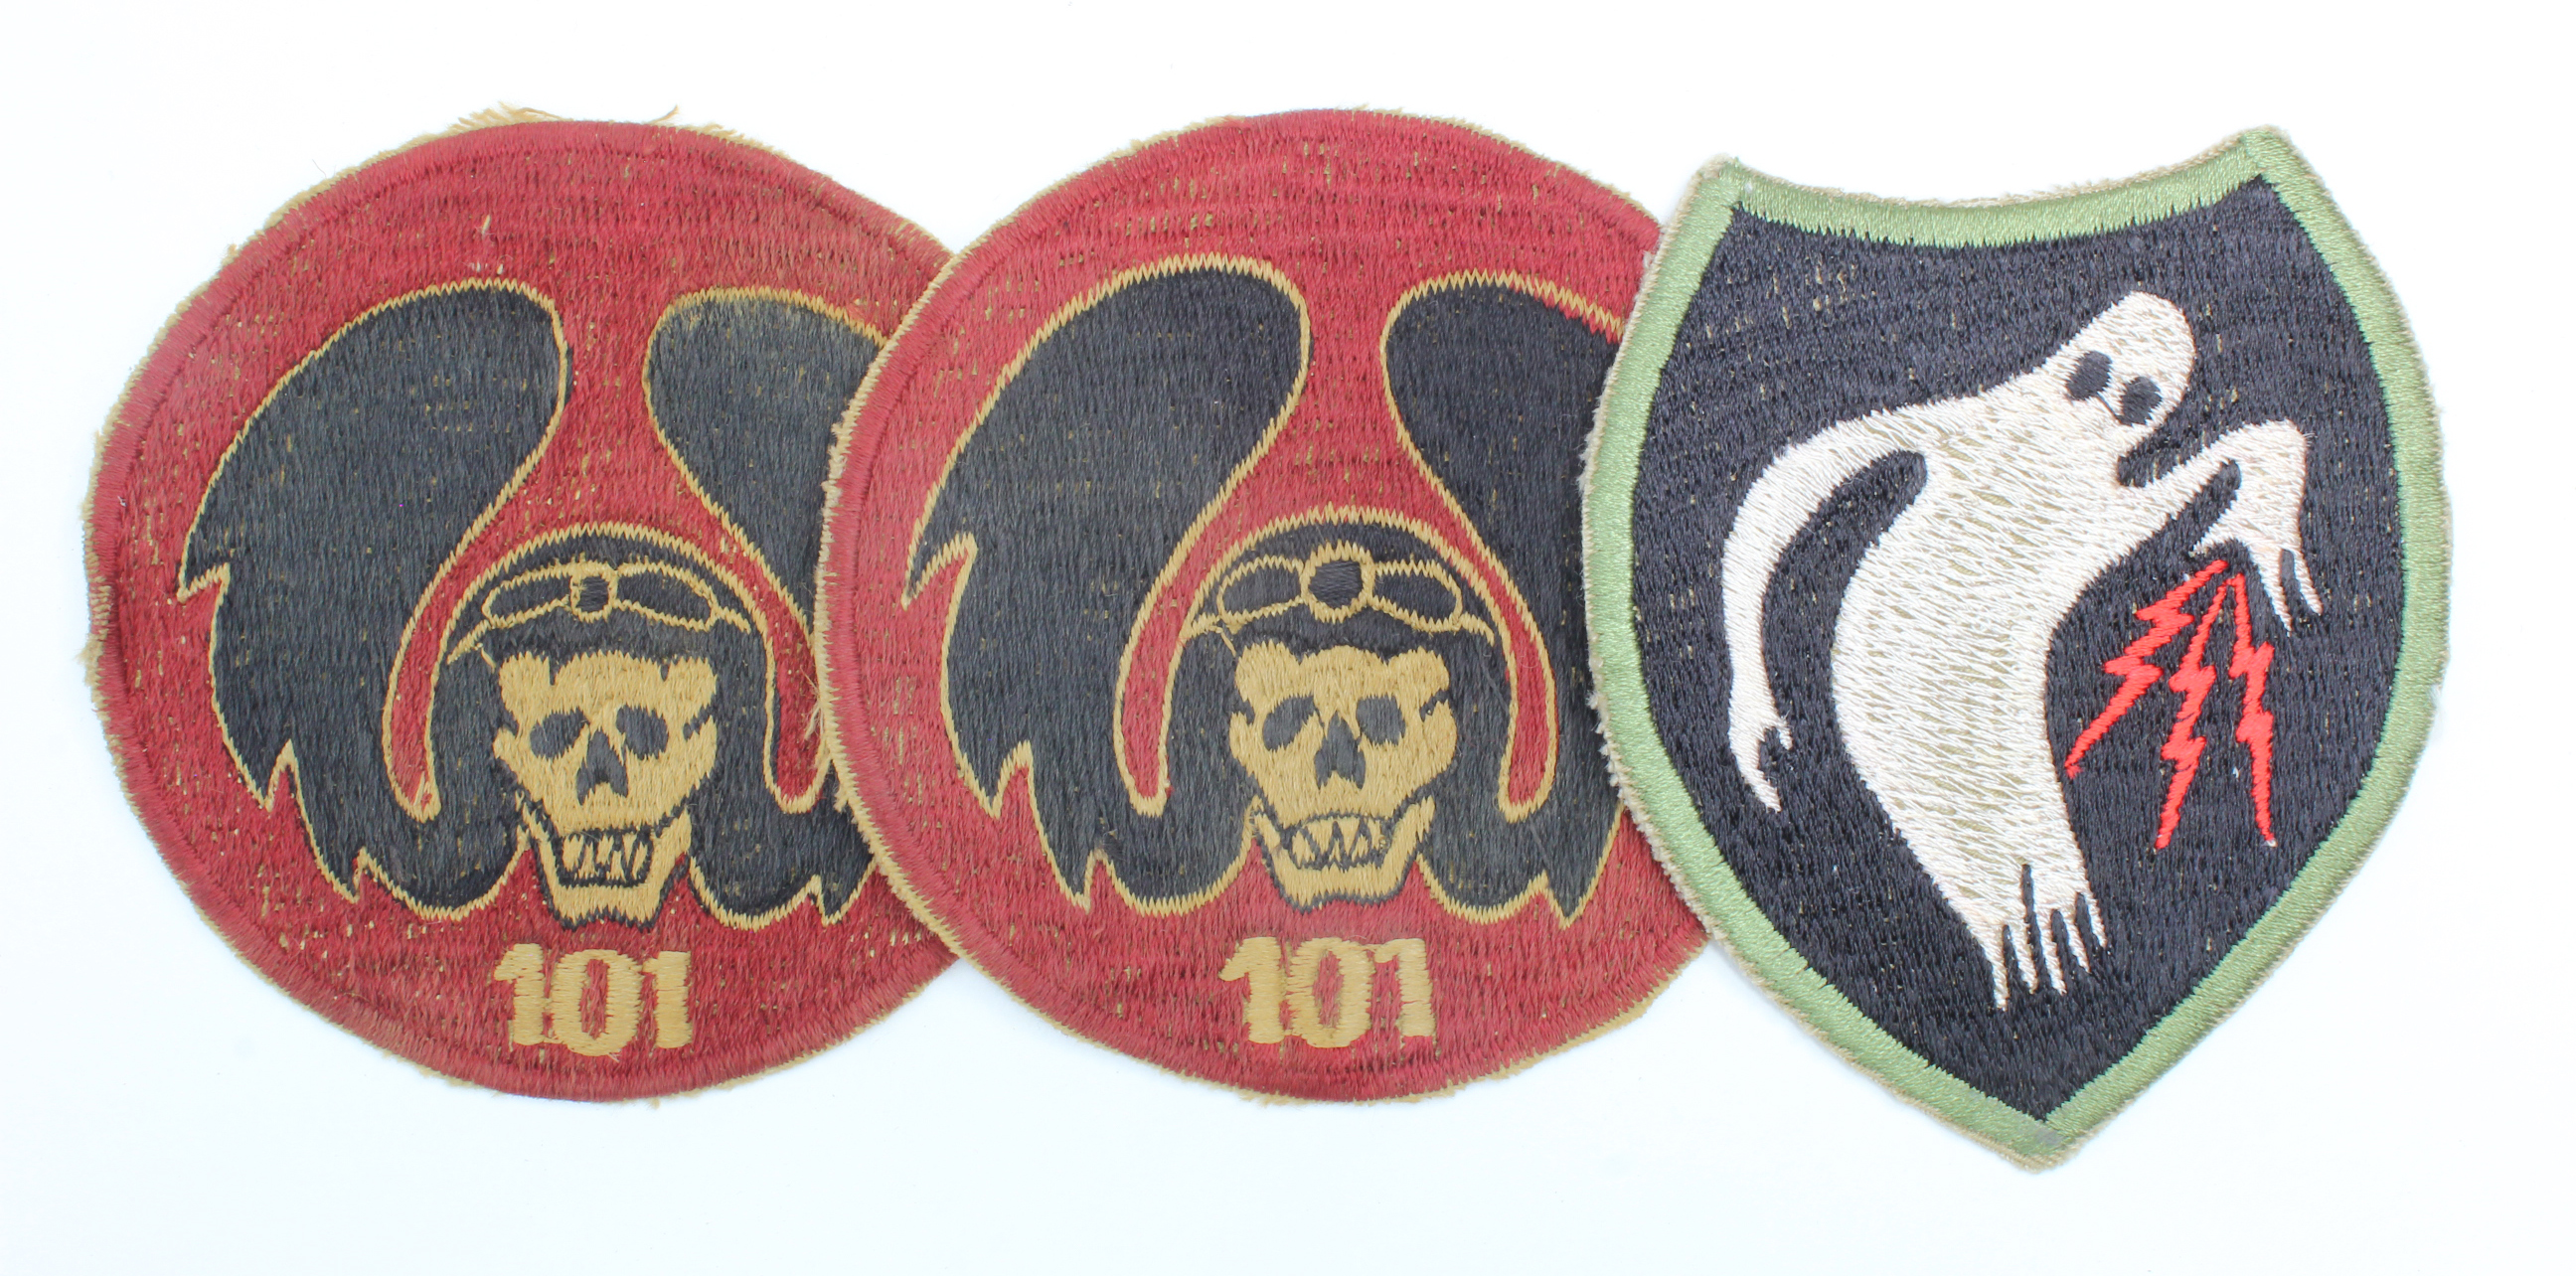 Israeli 101st Fighter Squadron Patches & WW2 style 23rd HQ Company (Ghost Army) Patch with printed